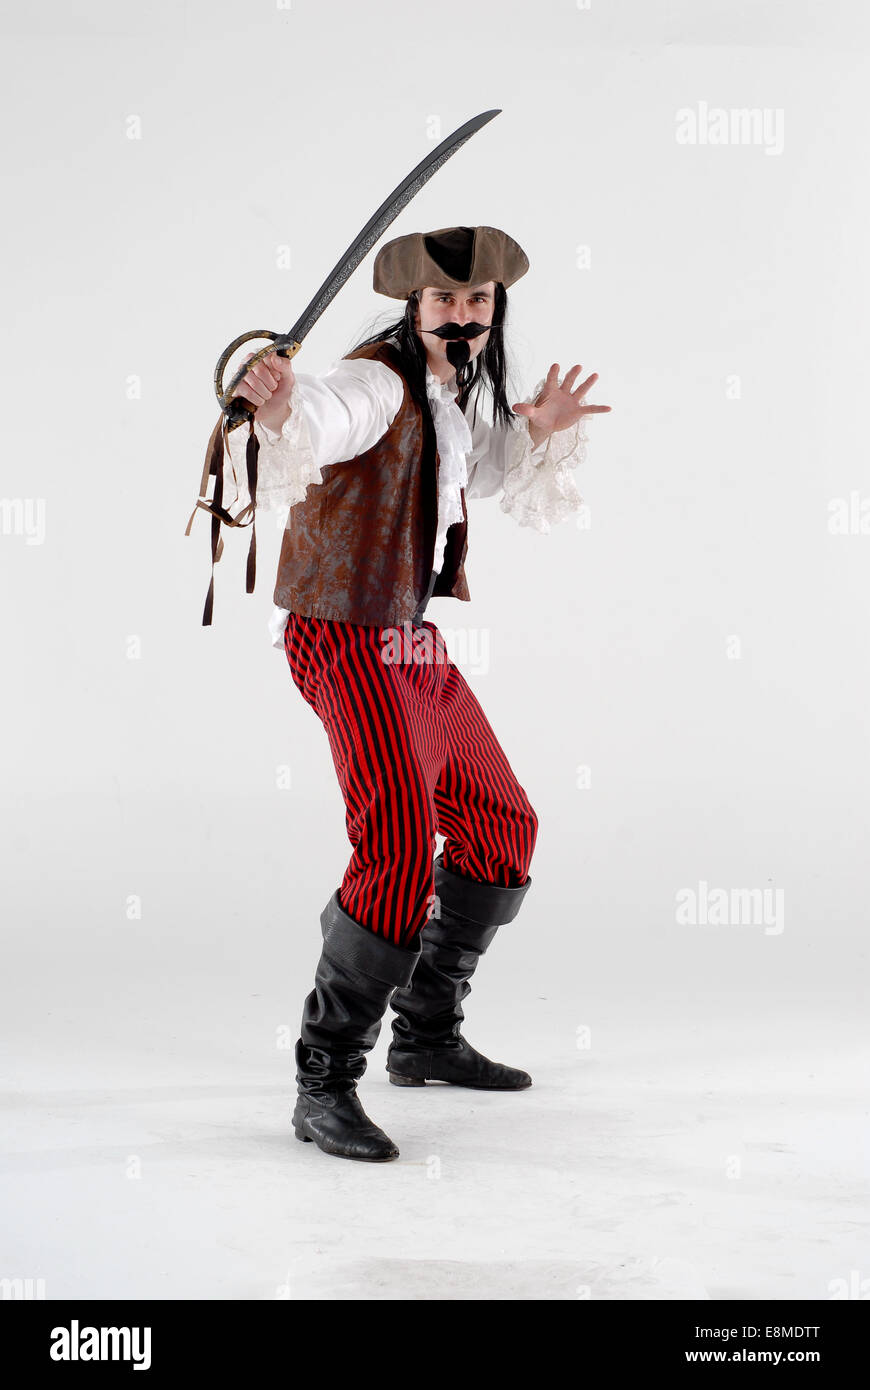 man in fancy dress comedy costume as a pirate with hat, goatee beard, sword, boots and full outfit Stock Photo